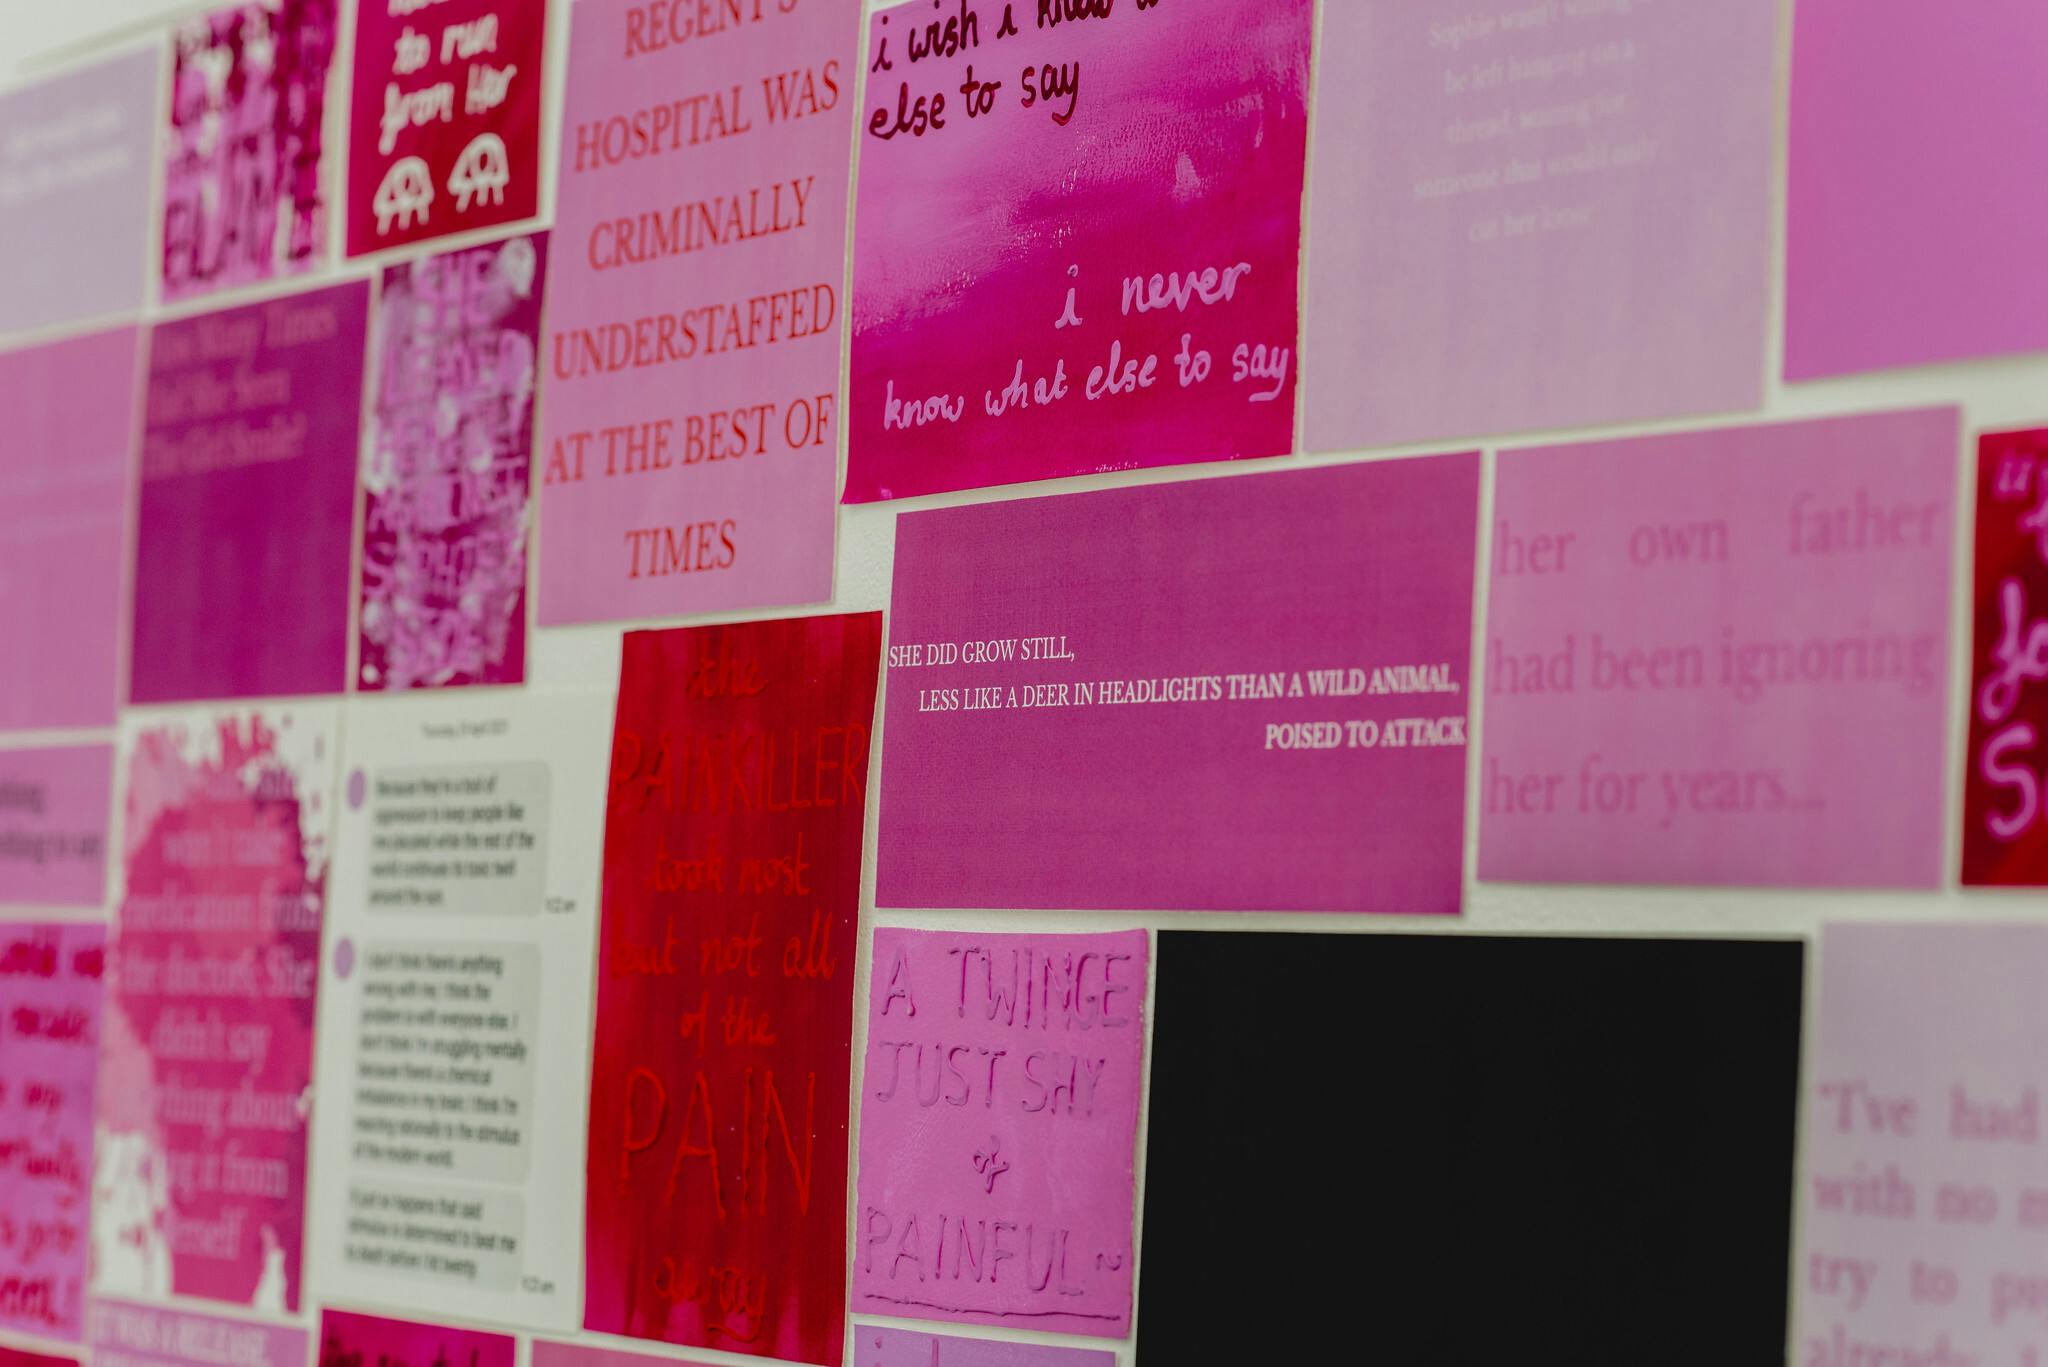 Plymouth College of Art Fine Art installation by E.J Willow featuring a wall of various shades of pink stickers, posters and quotes